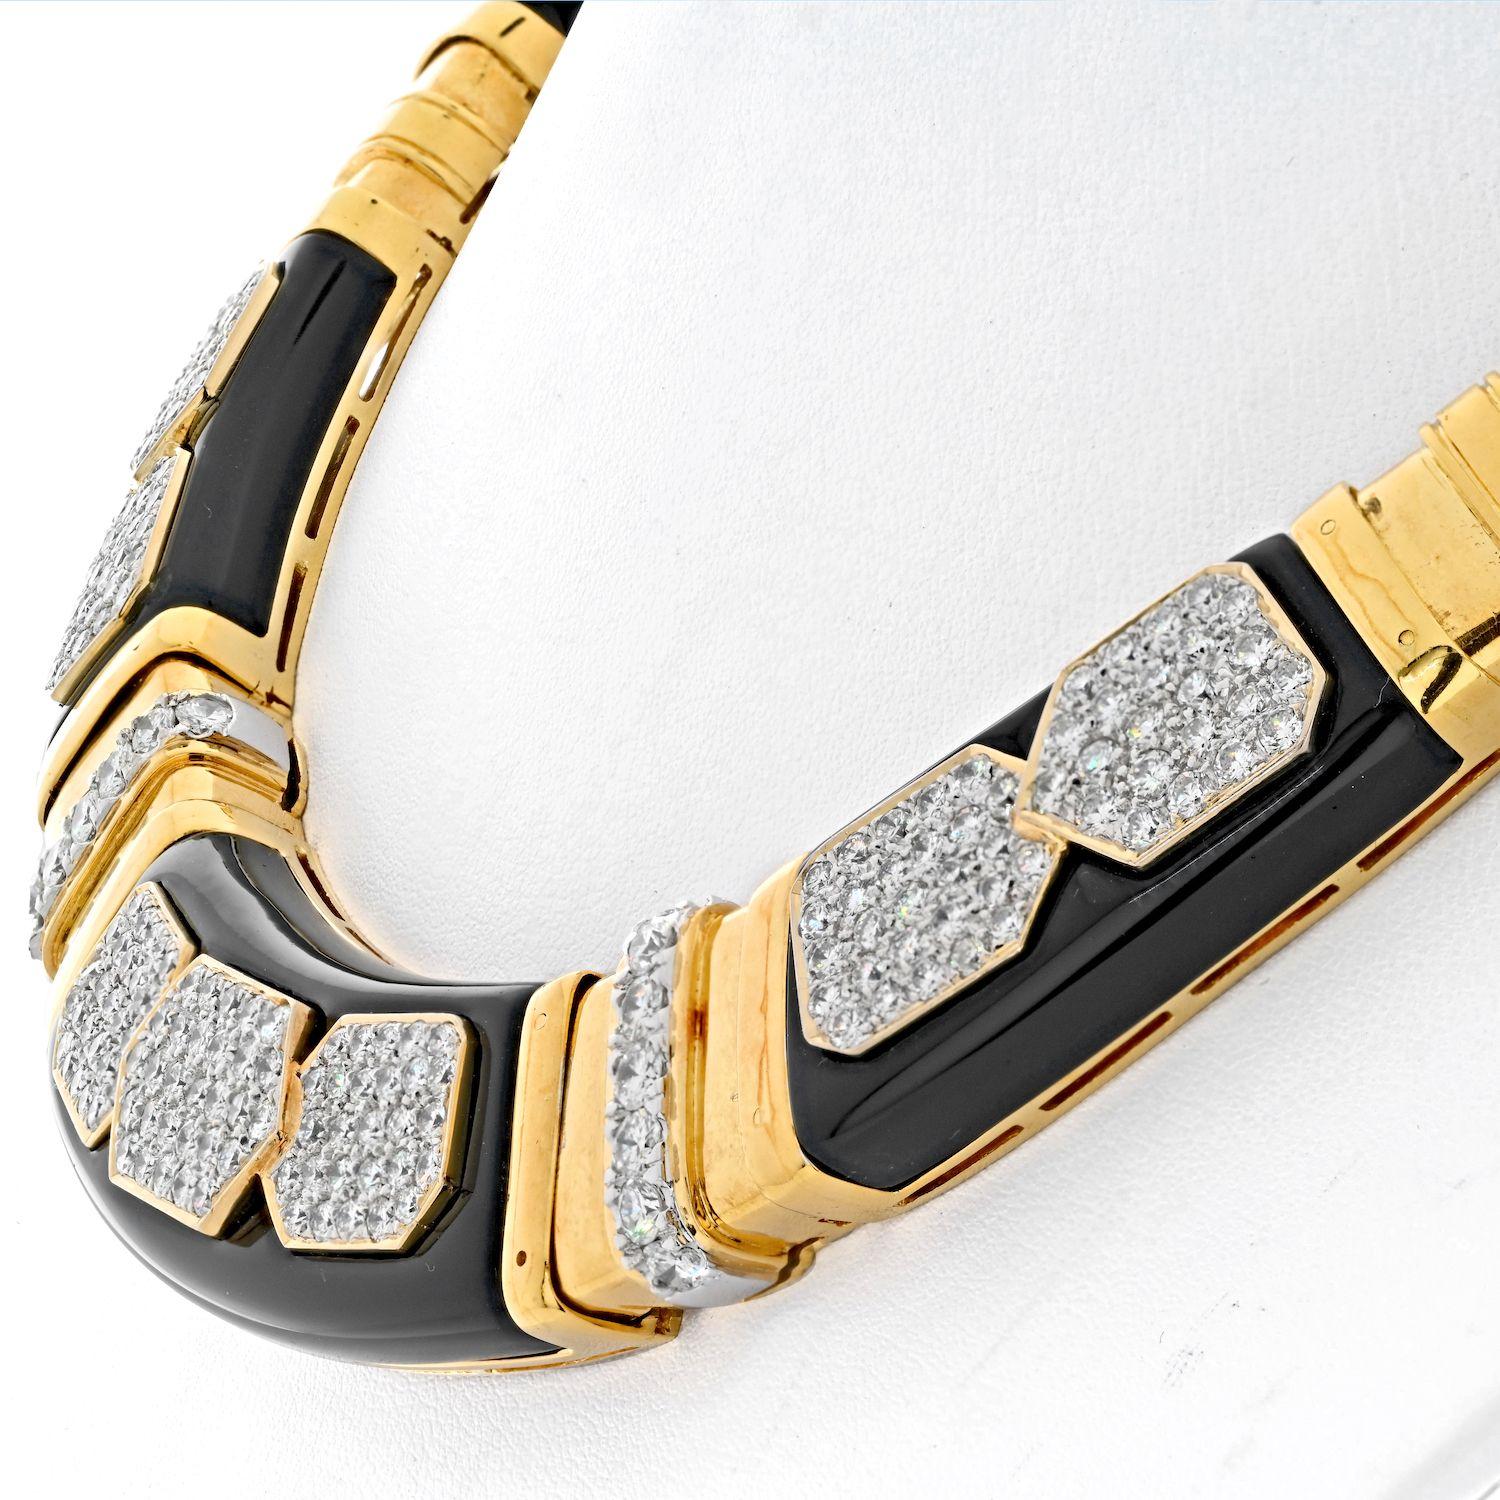 Estate 18K Yellow Gold diamond and onyx gold link collar necklace. Collar necklace is comprised of segmented diamond and gold links. Inlaid with onyx - opaque with black color and excellent polish. Featuring seven white gold pavè diamond plaques.